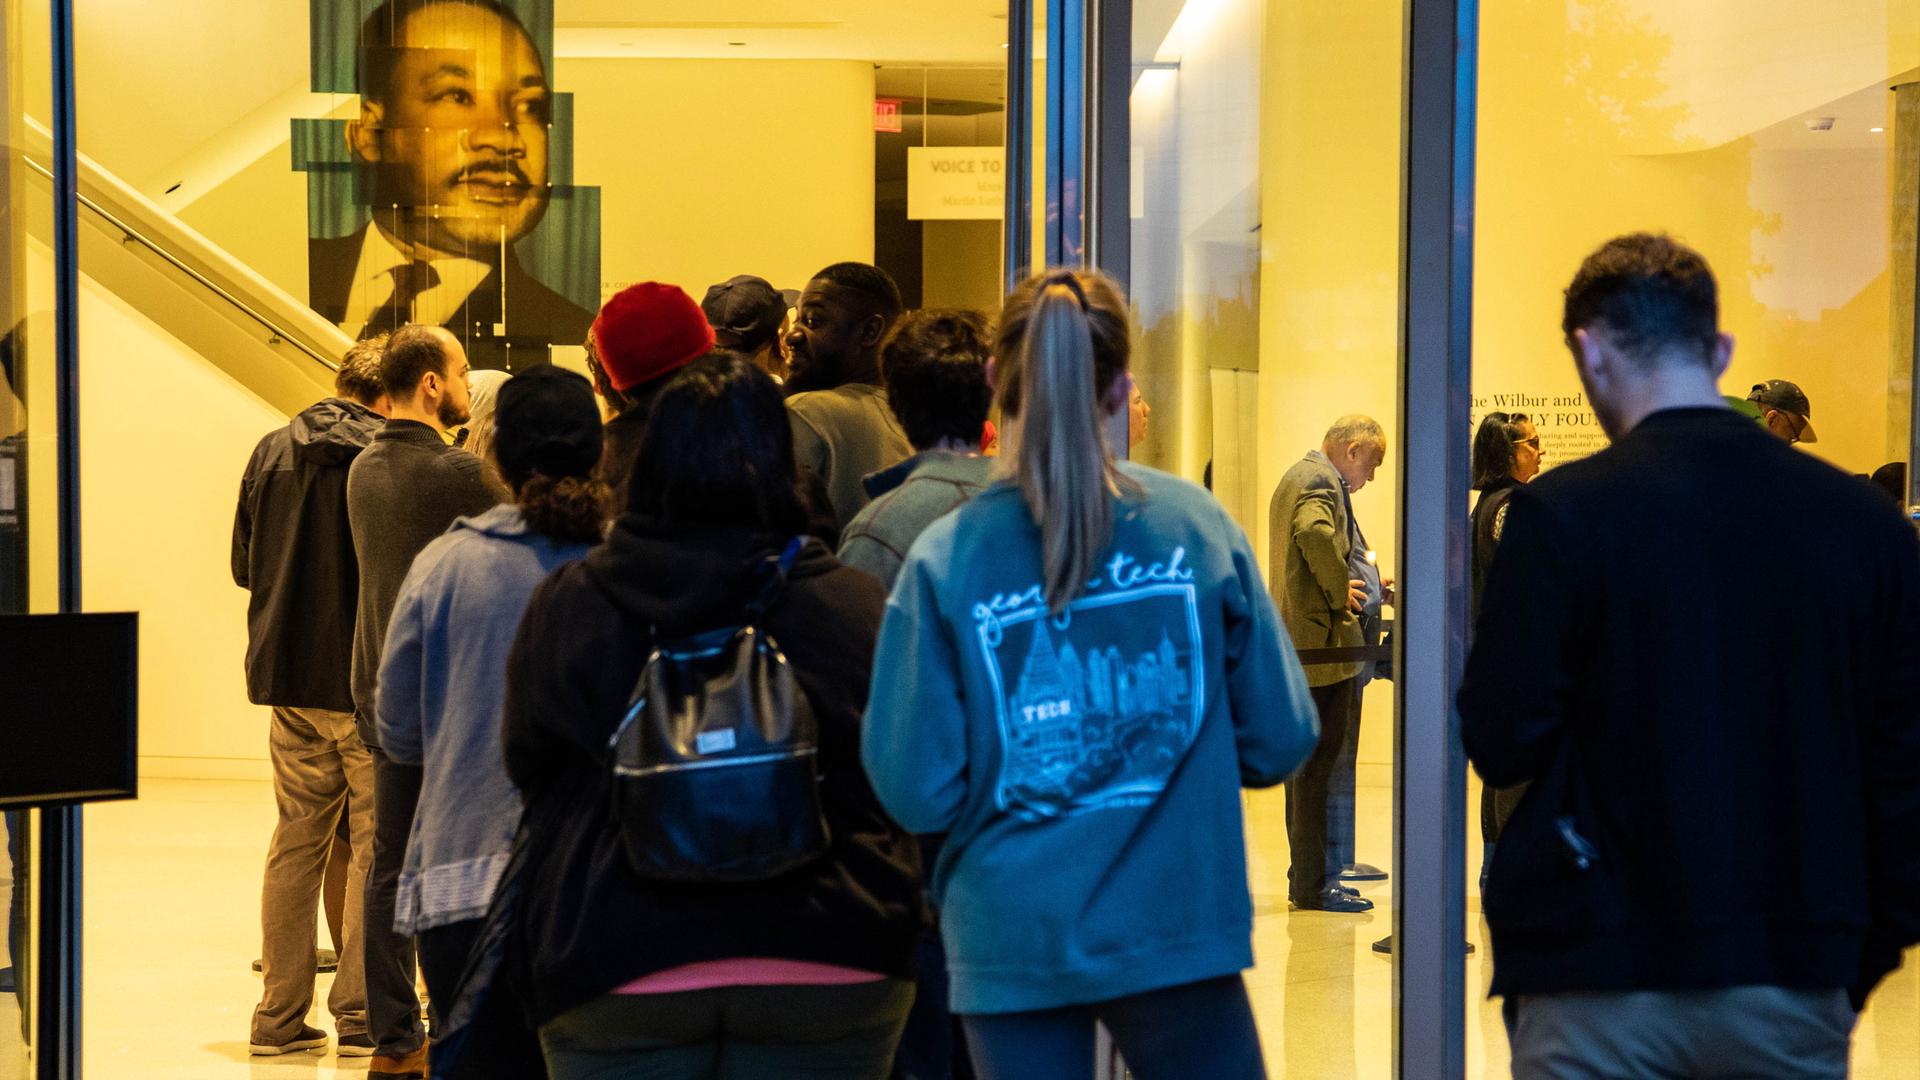 People line up in a voting queue. Above them is a portrait of Martin Luther King Jr.